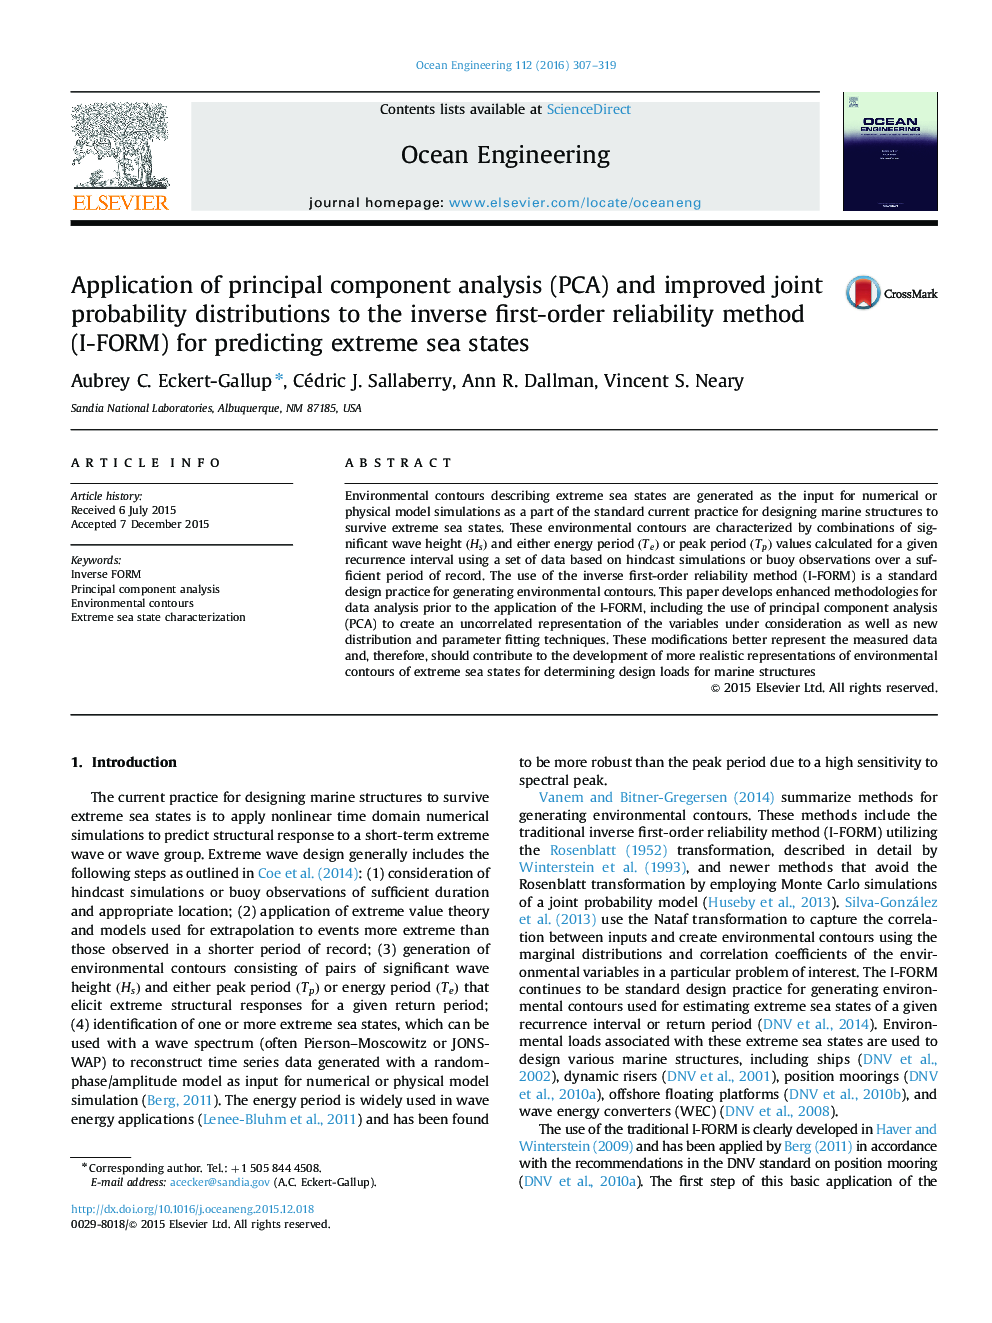 Application of principal component analysis (PCA) and improved joint probability distributions to the inverse first-order reliability method (I-FORM) for predicting extreme sea states